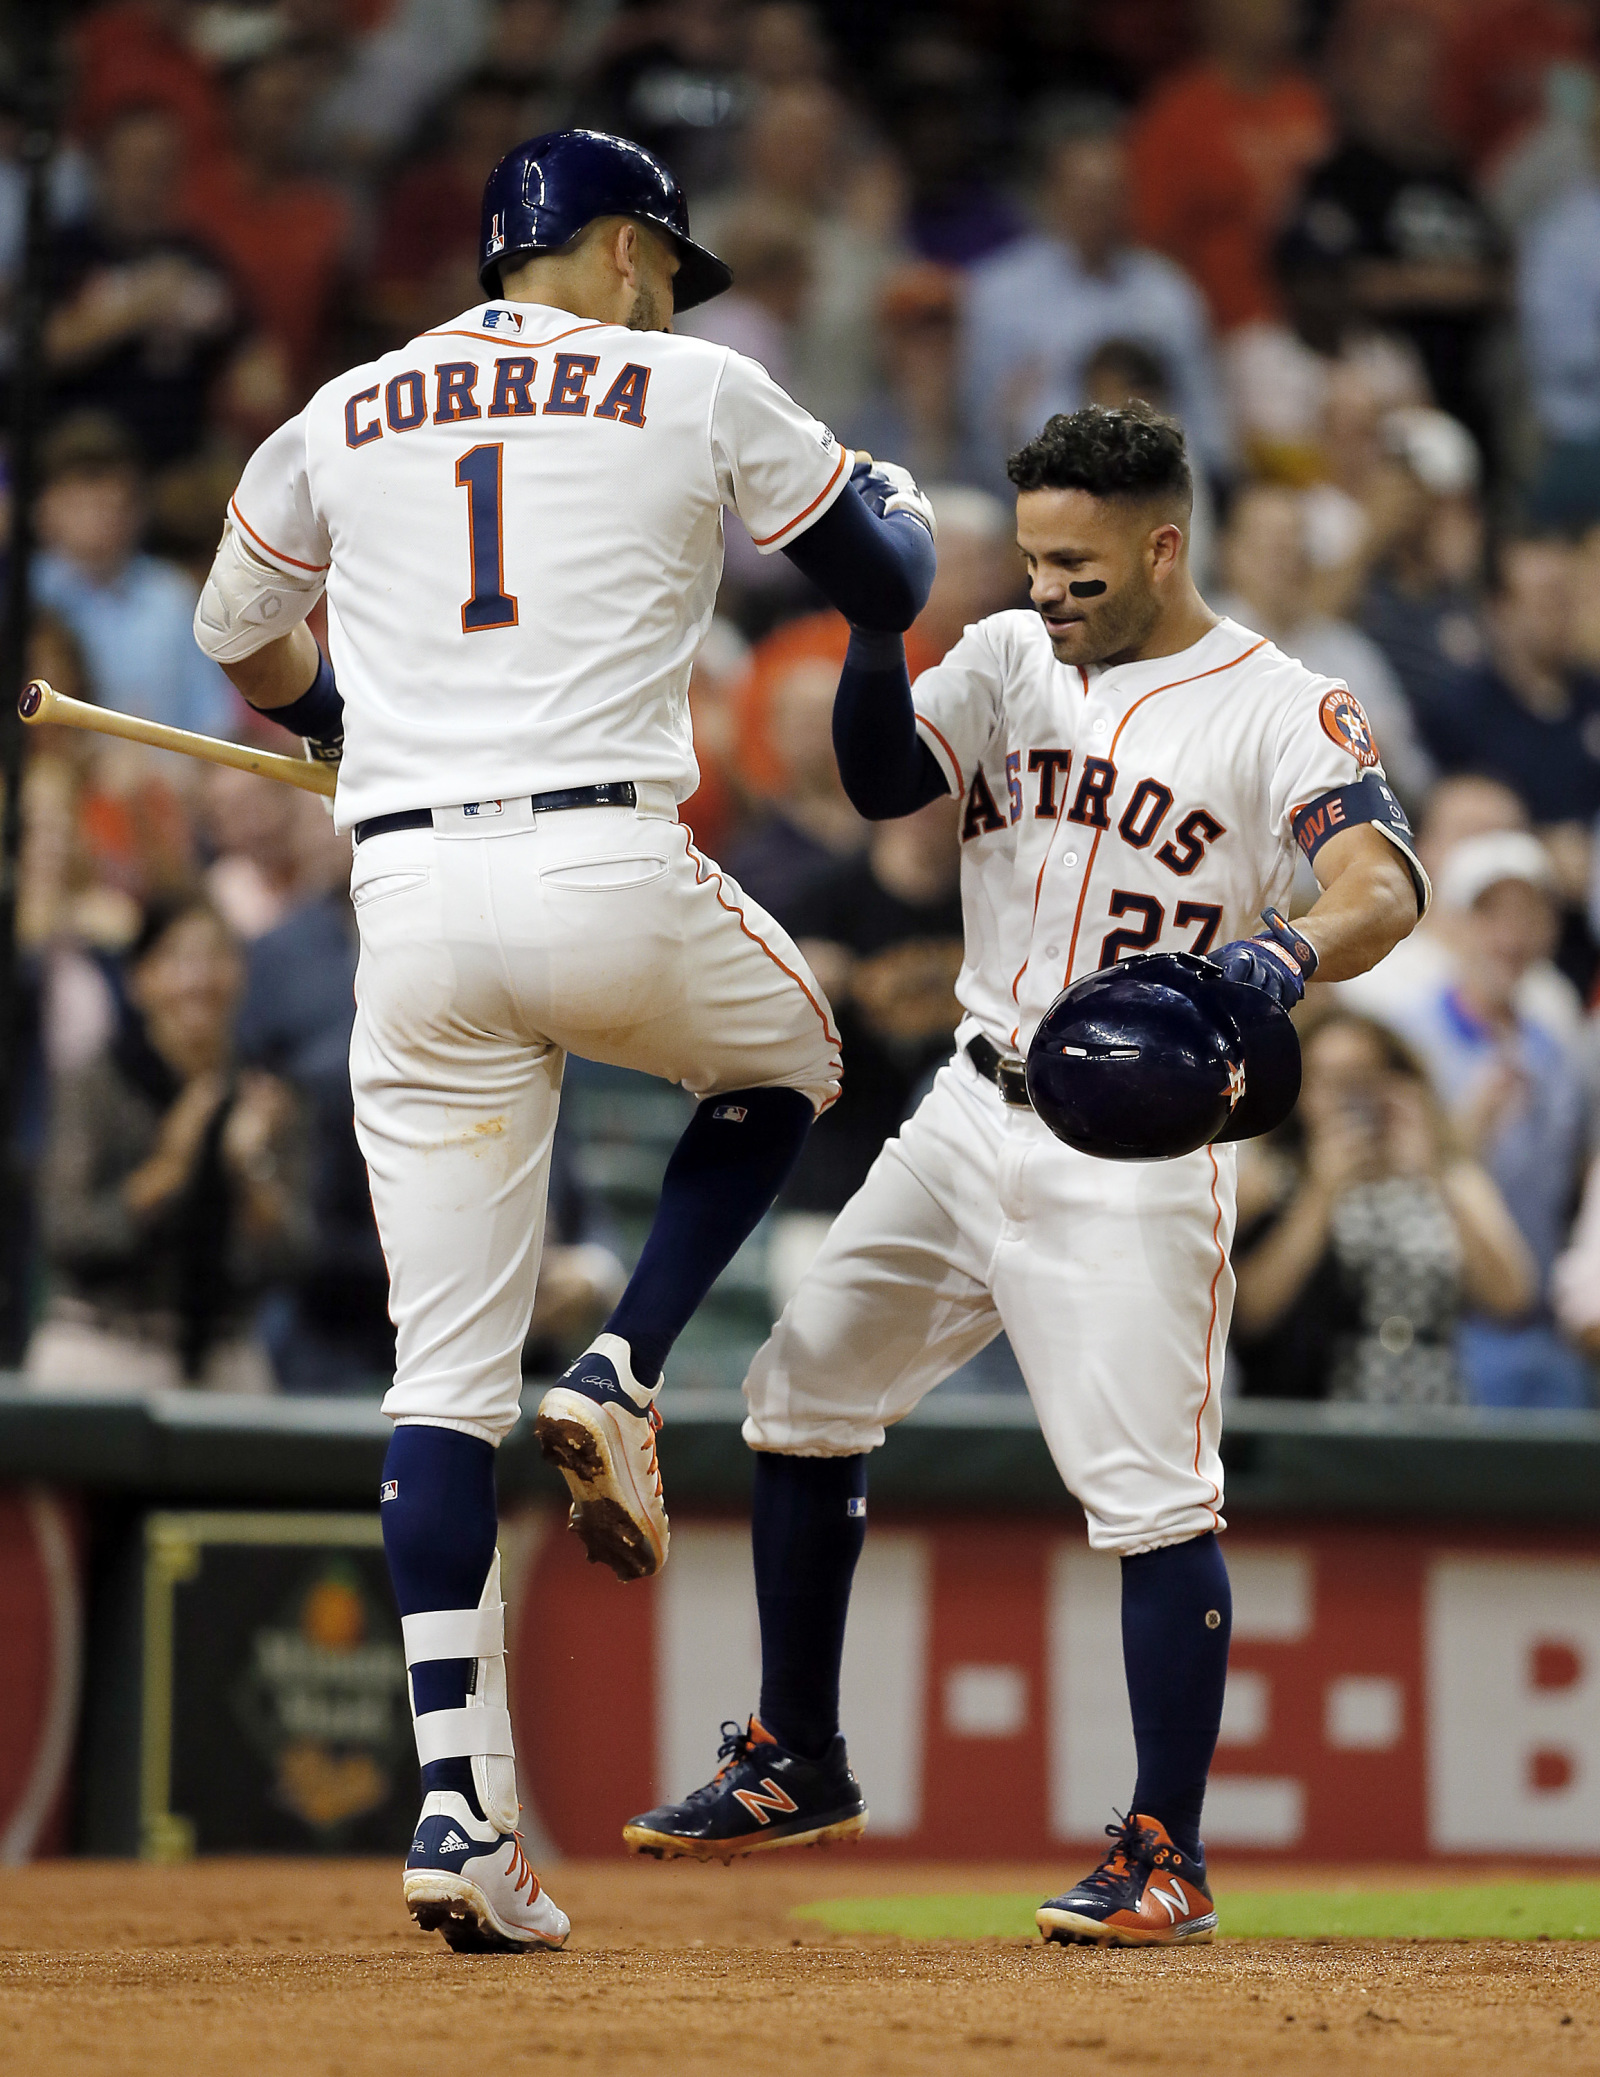 Jose Altuve injury: Quest for 2,000 hits halted by early exit